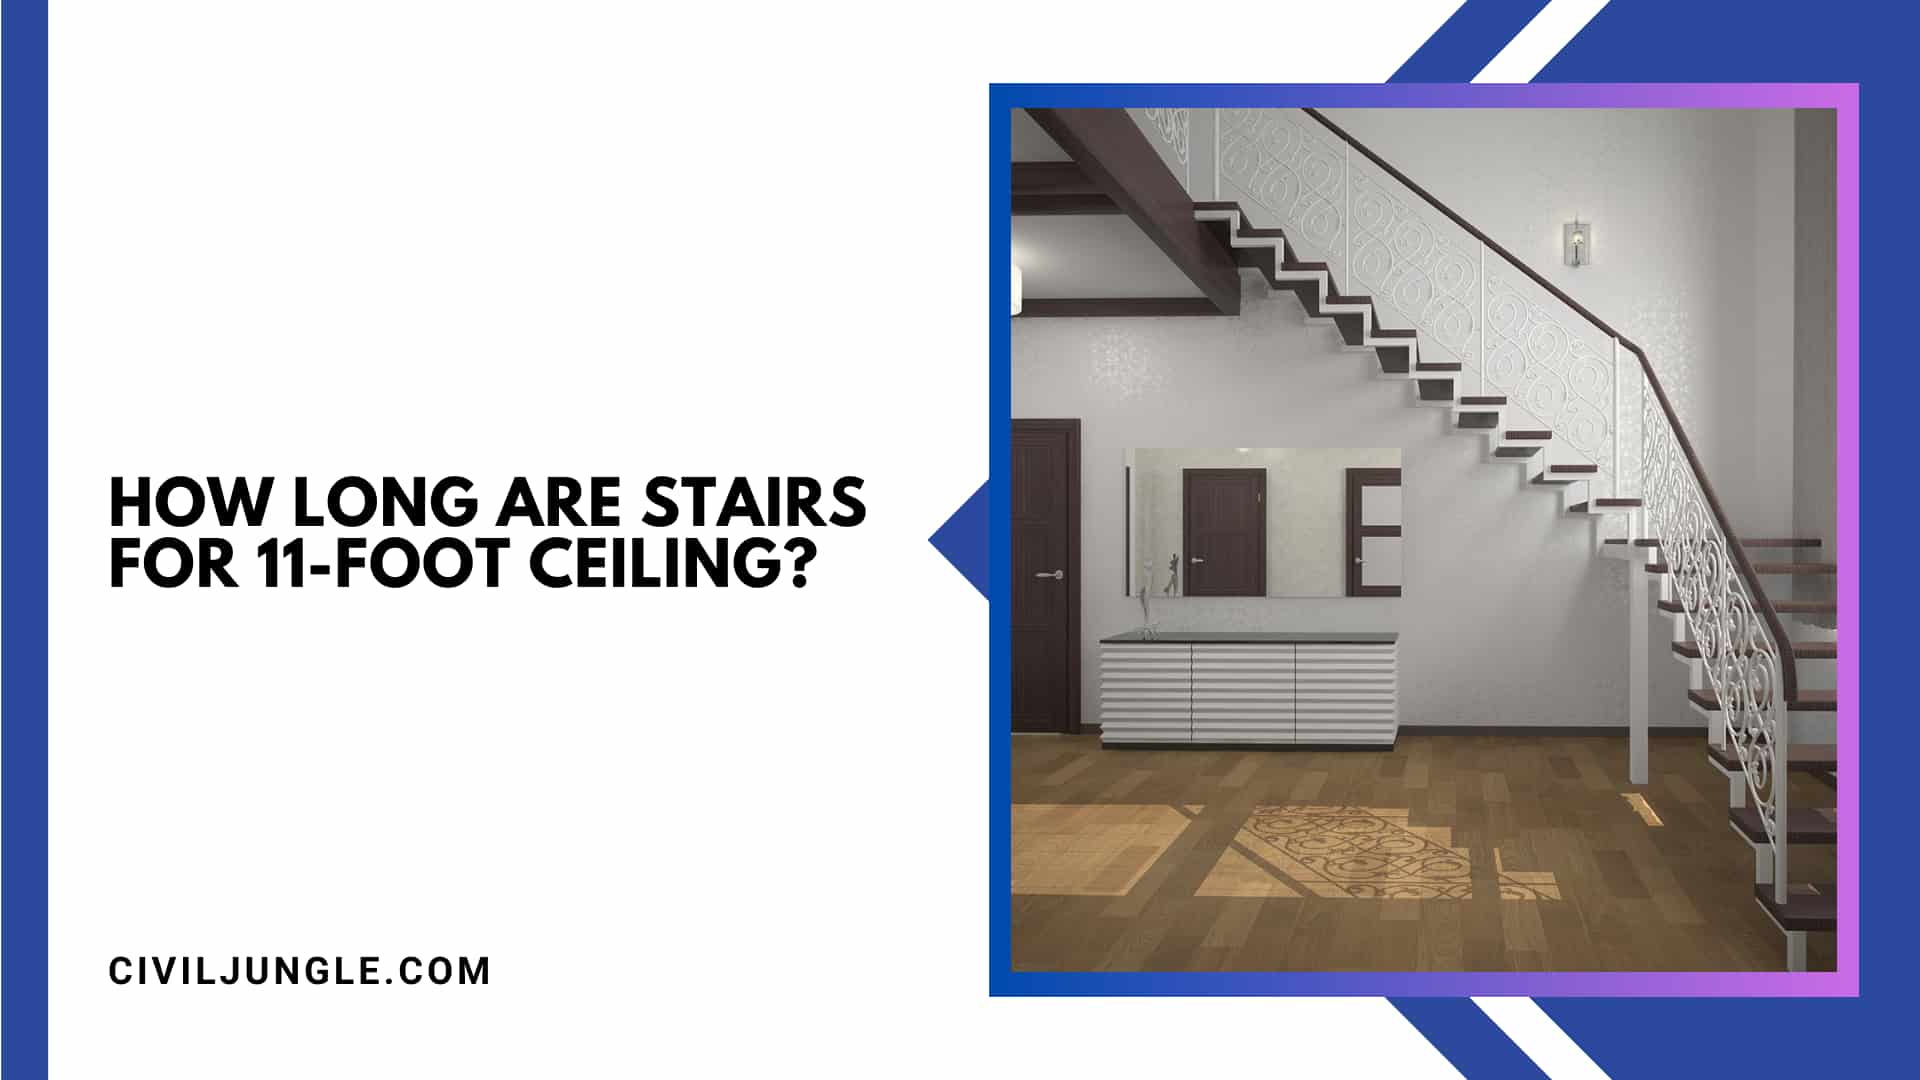 How Long Are Stairs for 11-Foot Ceiling?